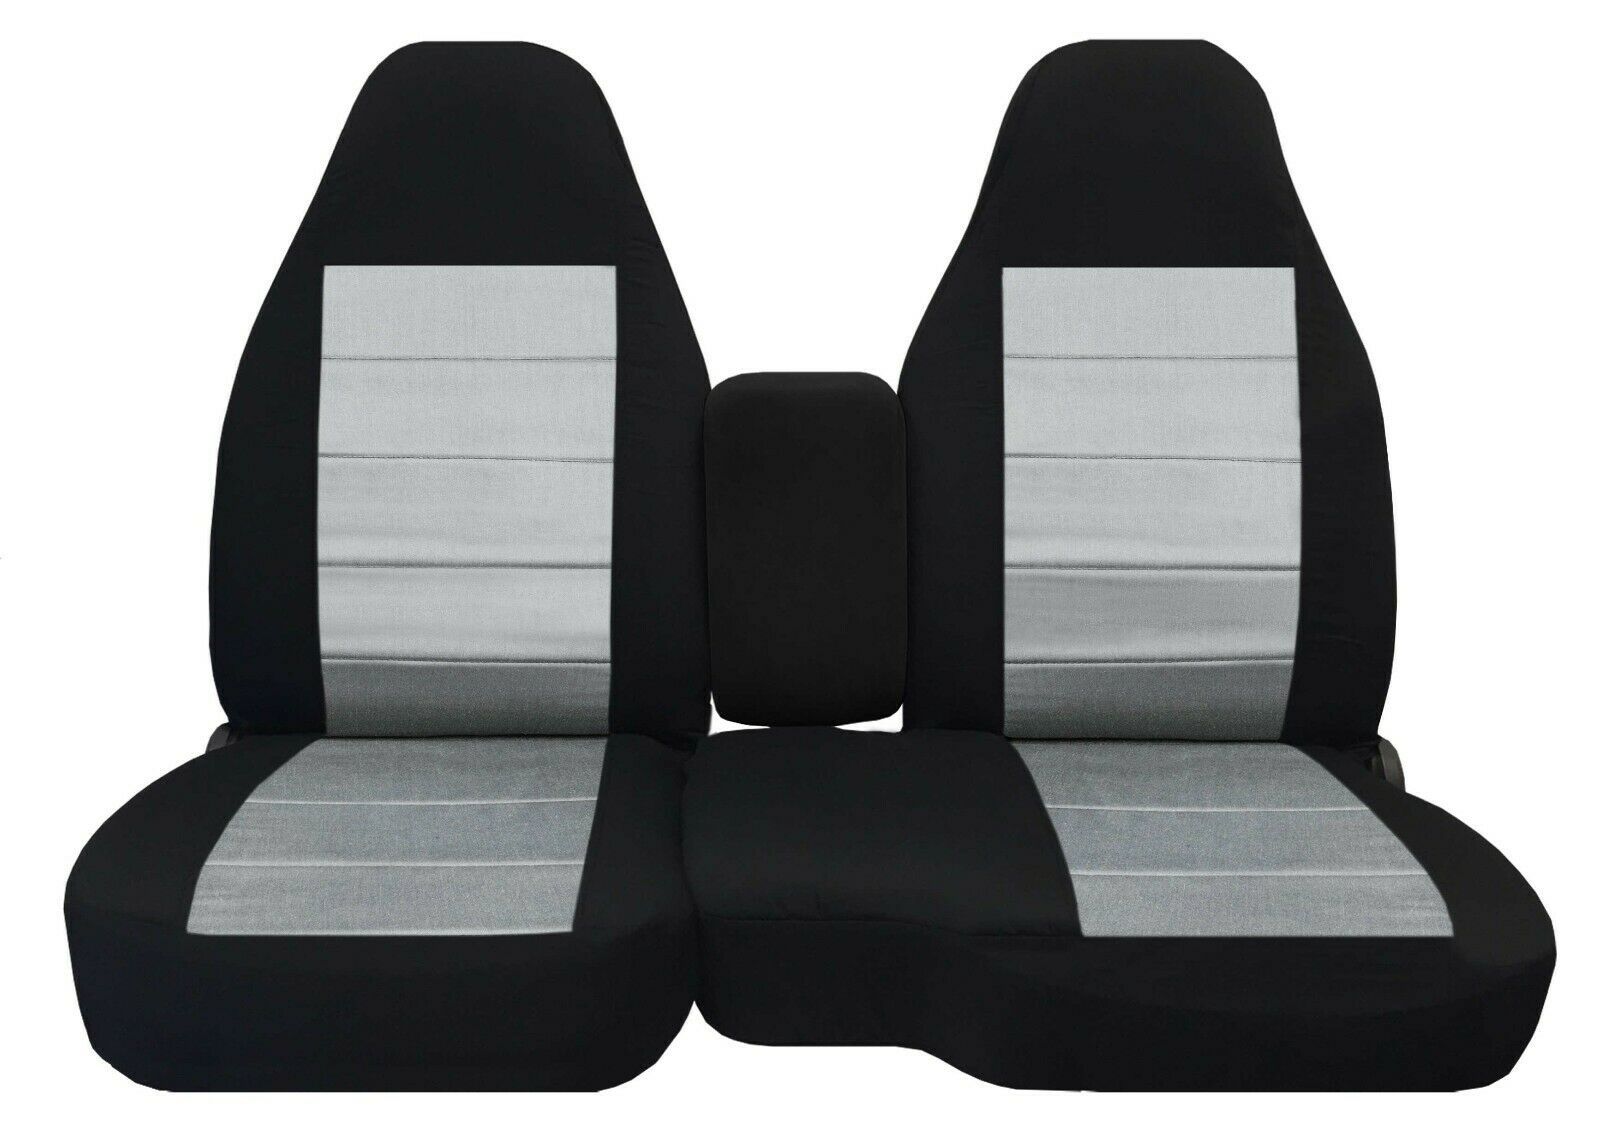 Primary image for Truck seat covers fits Ford Ranger 2004-2012  60/40 Highback seat with Console